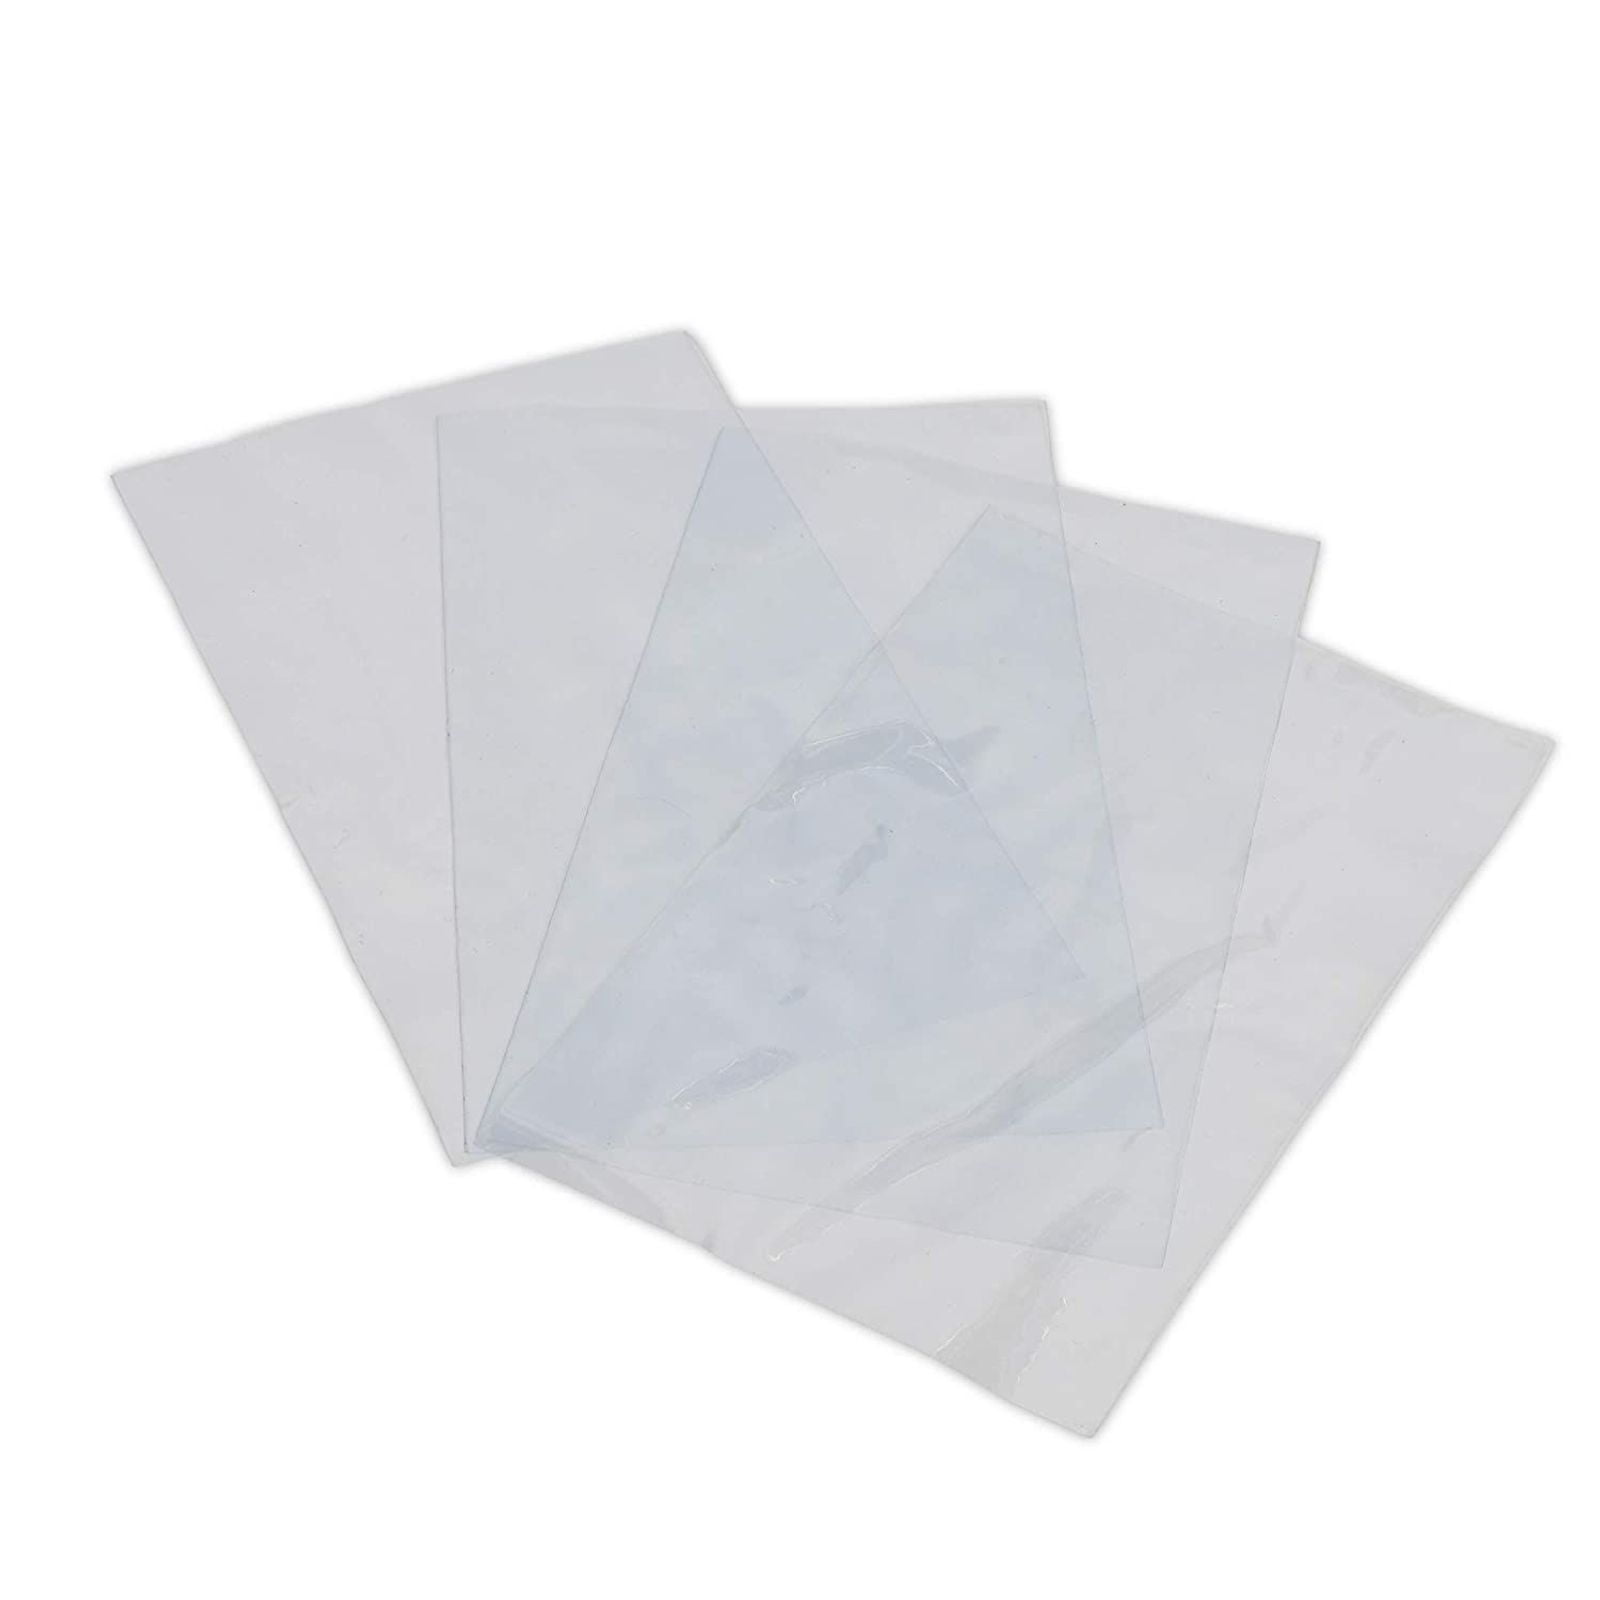 Details about   100PCS PVC Heat Shrink Wrap Bags Film for Homemade DIY Project Gift Packaging 